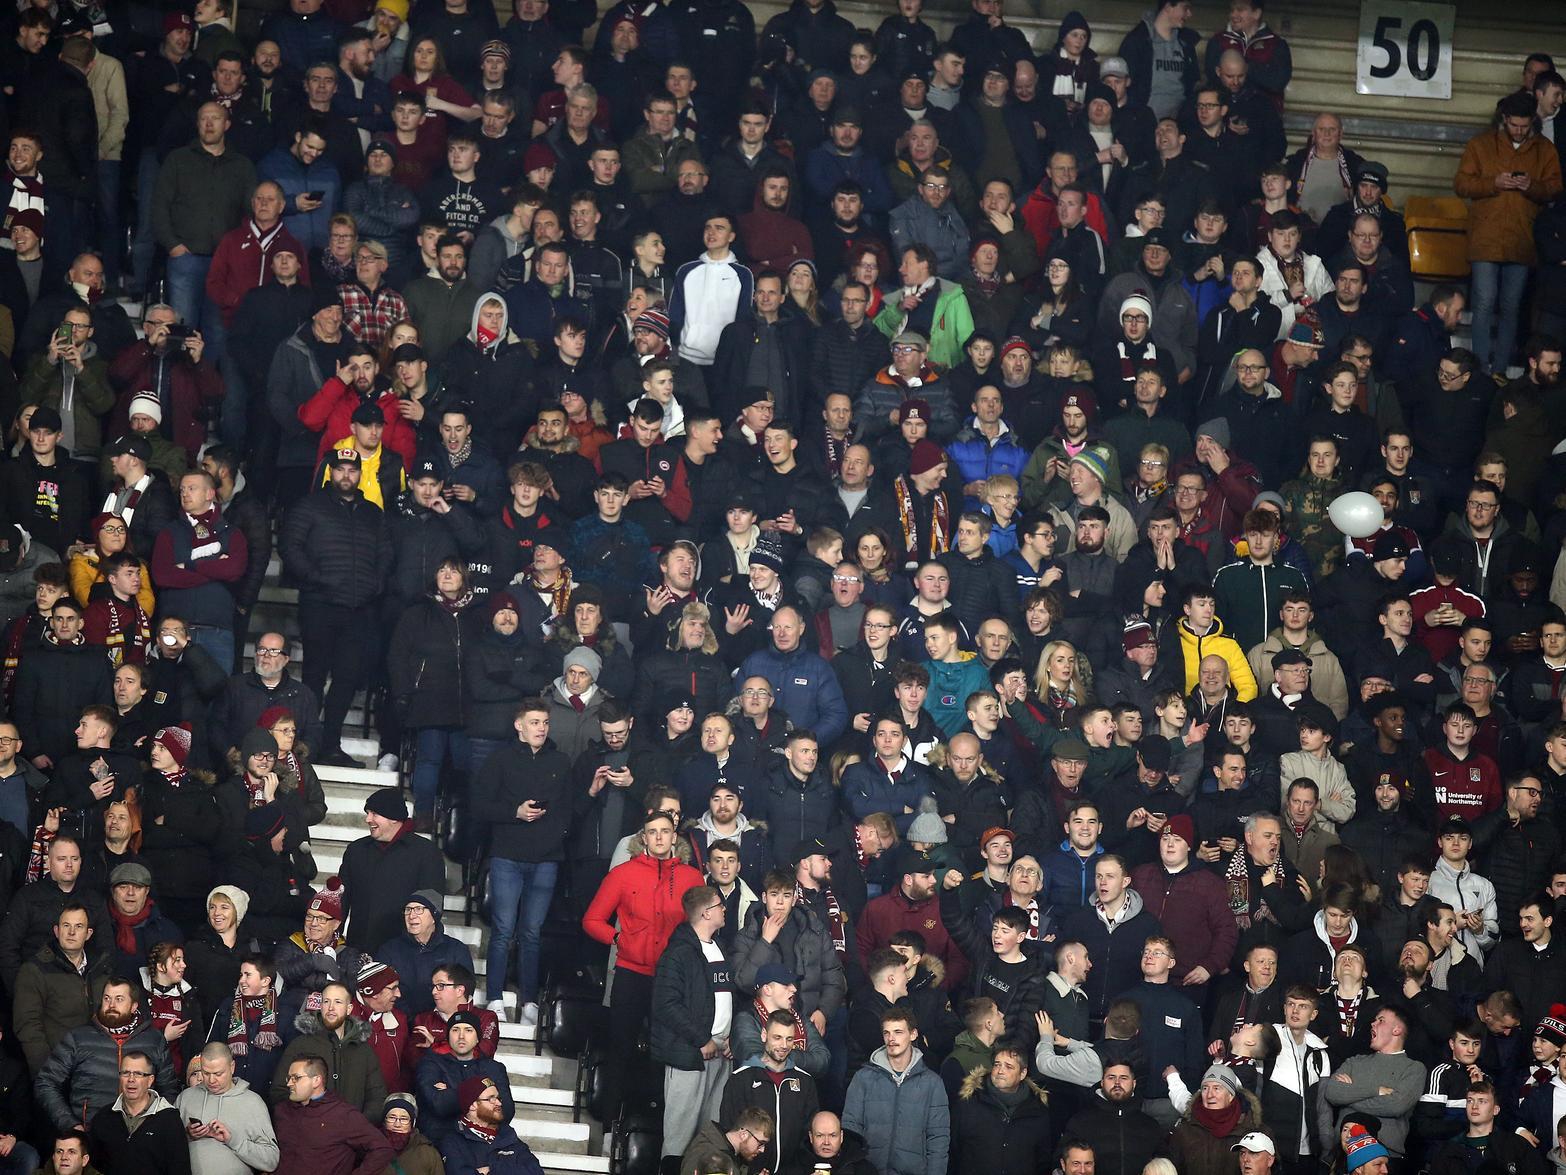 Cobblers fans made up almost one third of the 15,000 attendance at Pride Park